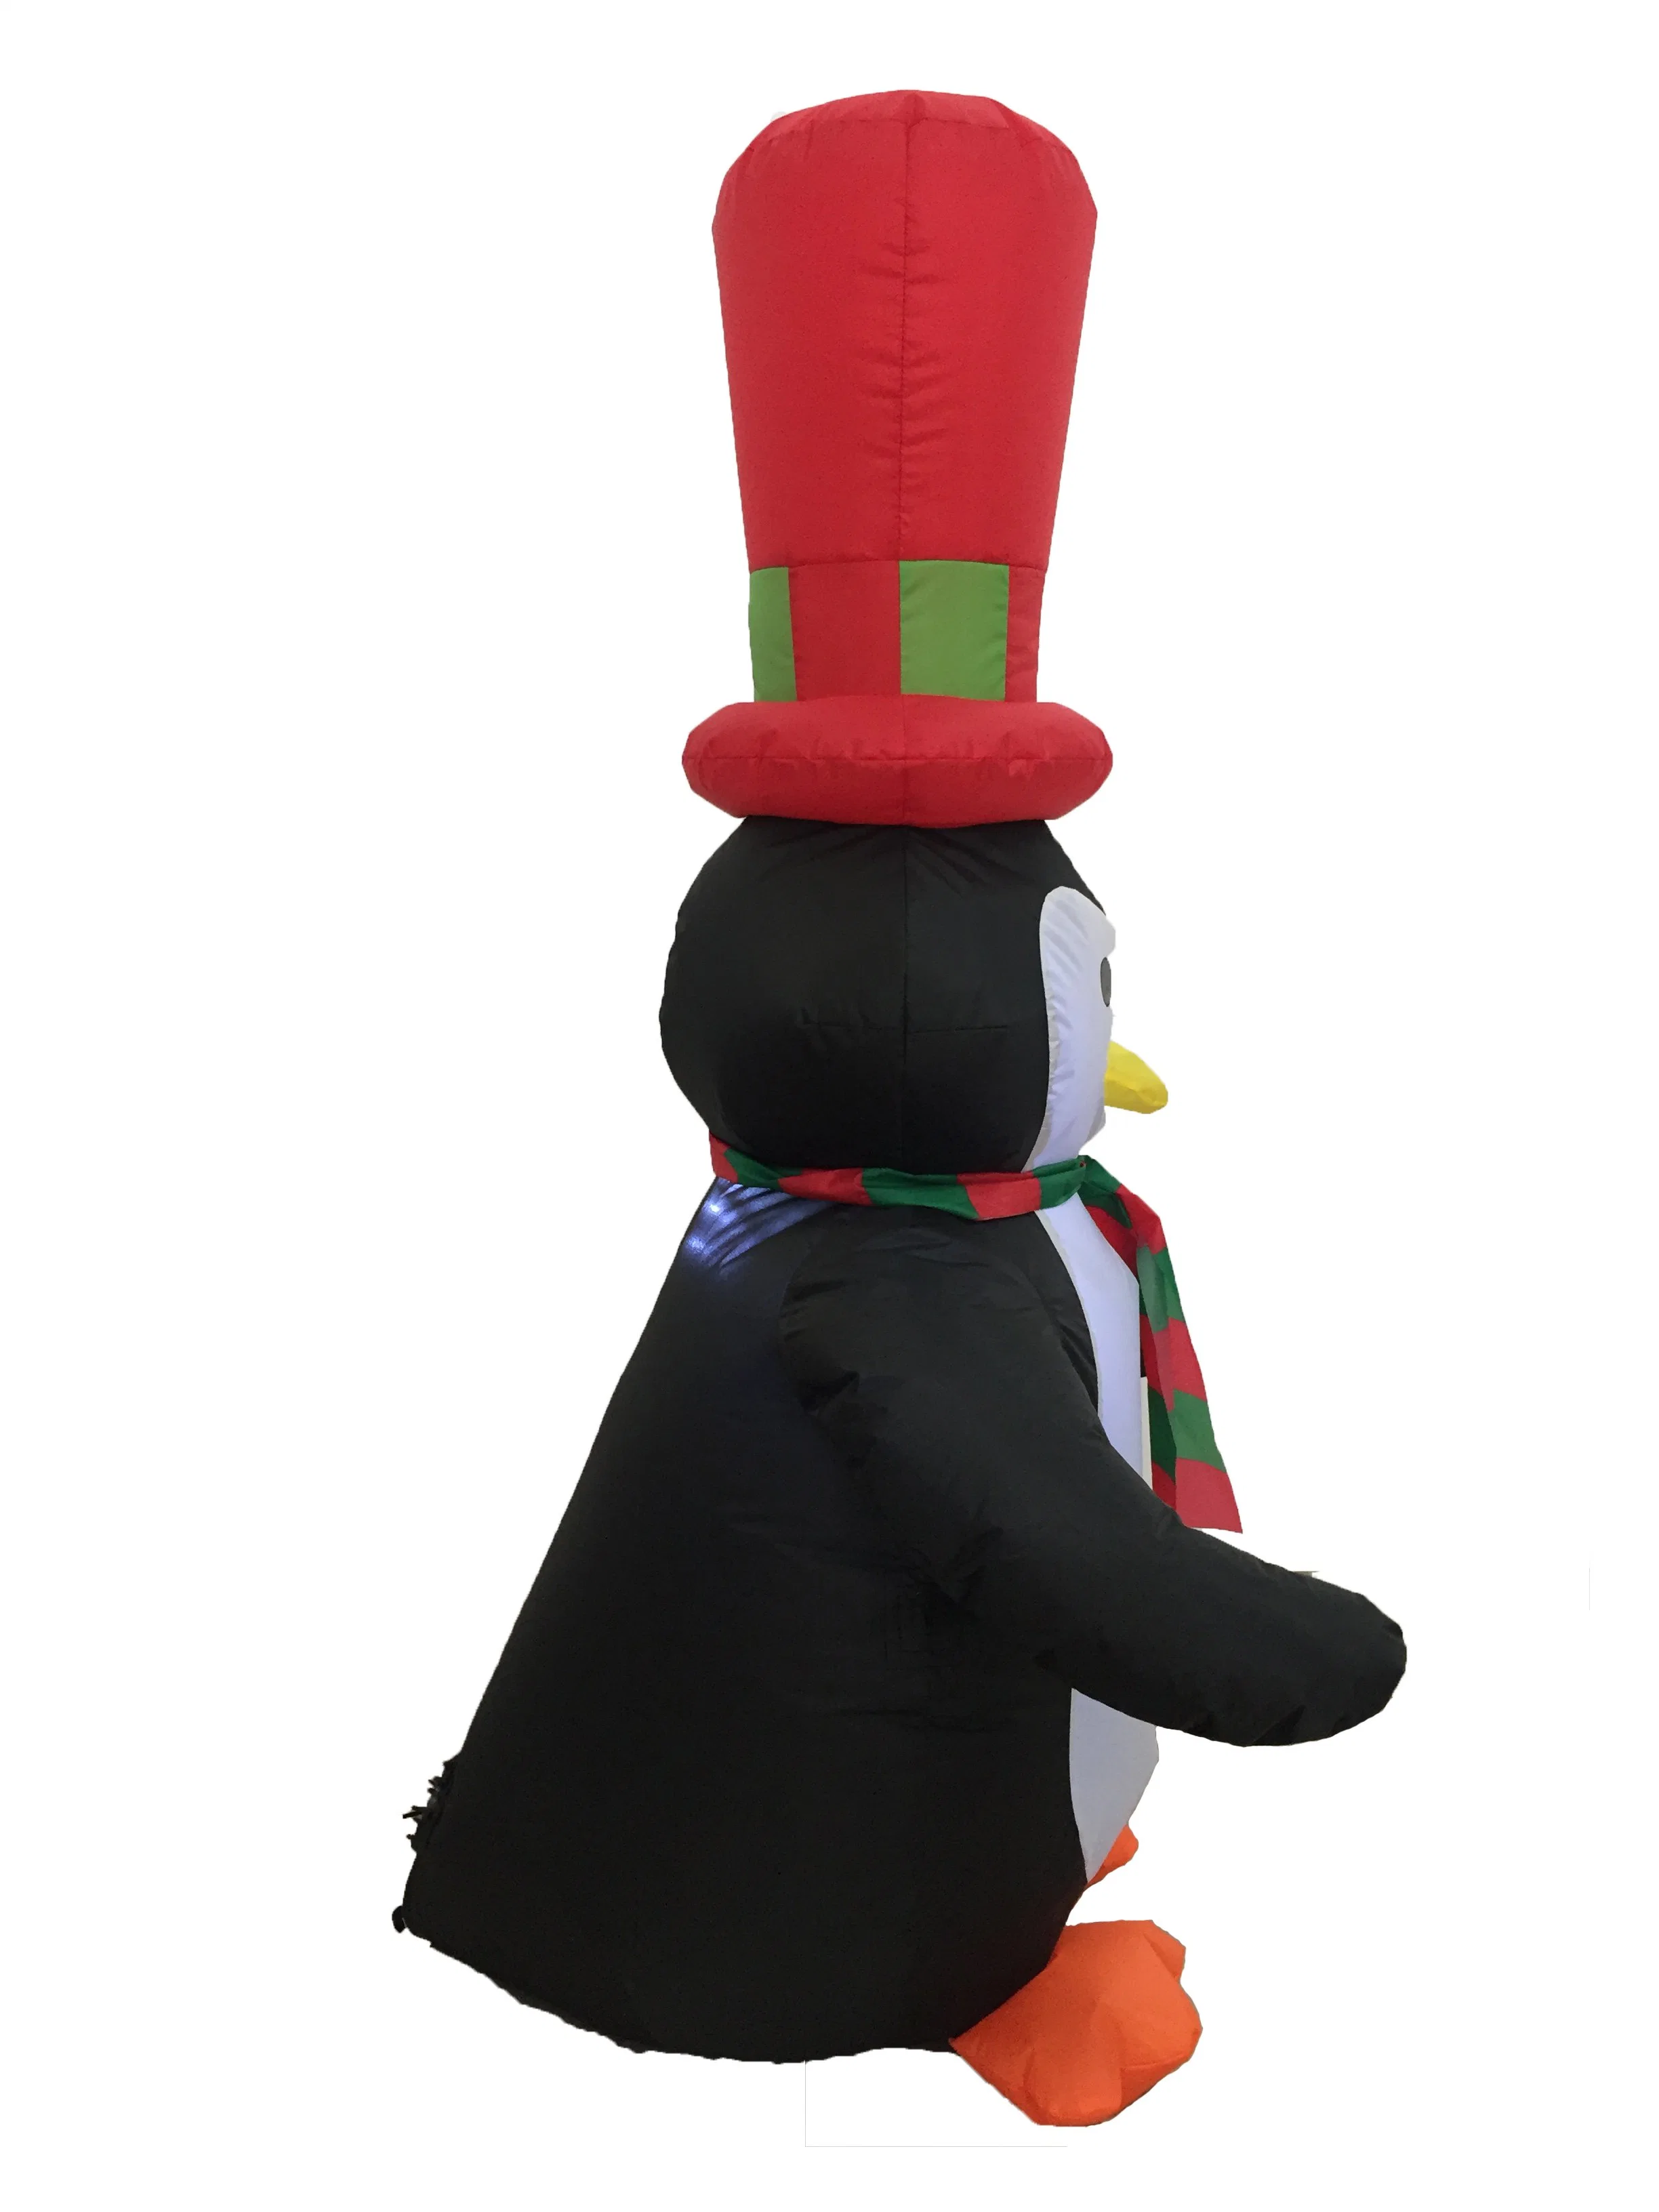 4FT High Hat Inflatable Sittingpenguin, Christmas Party Blow up Yard Home Lawn Decoration